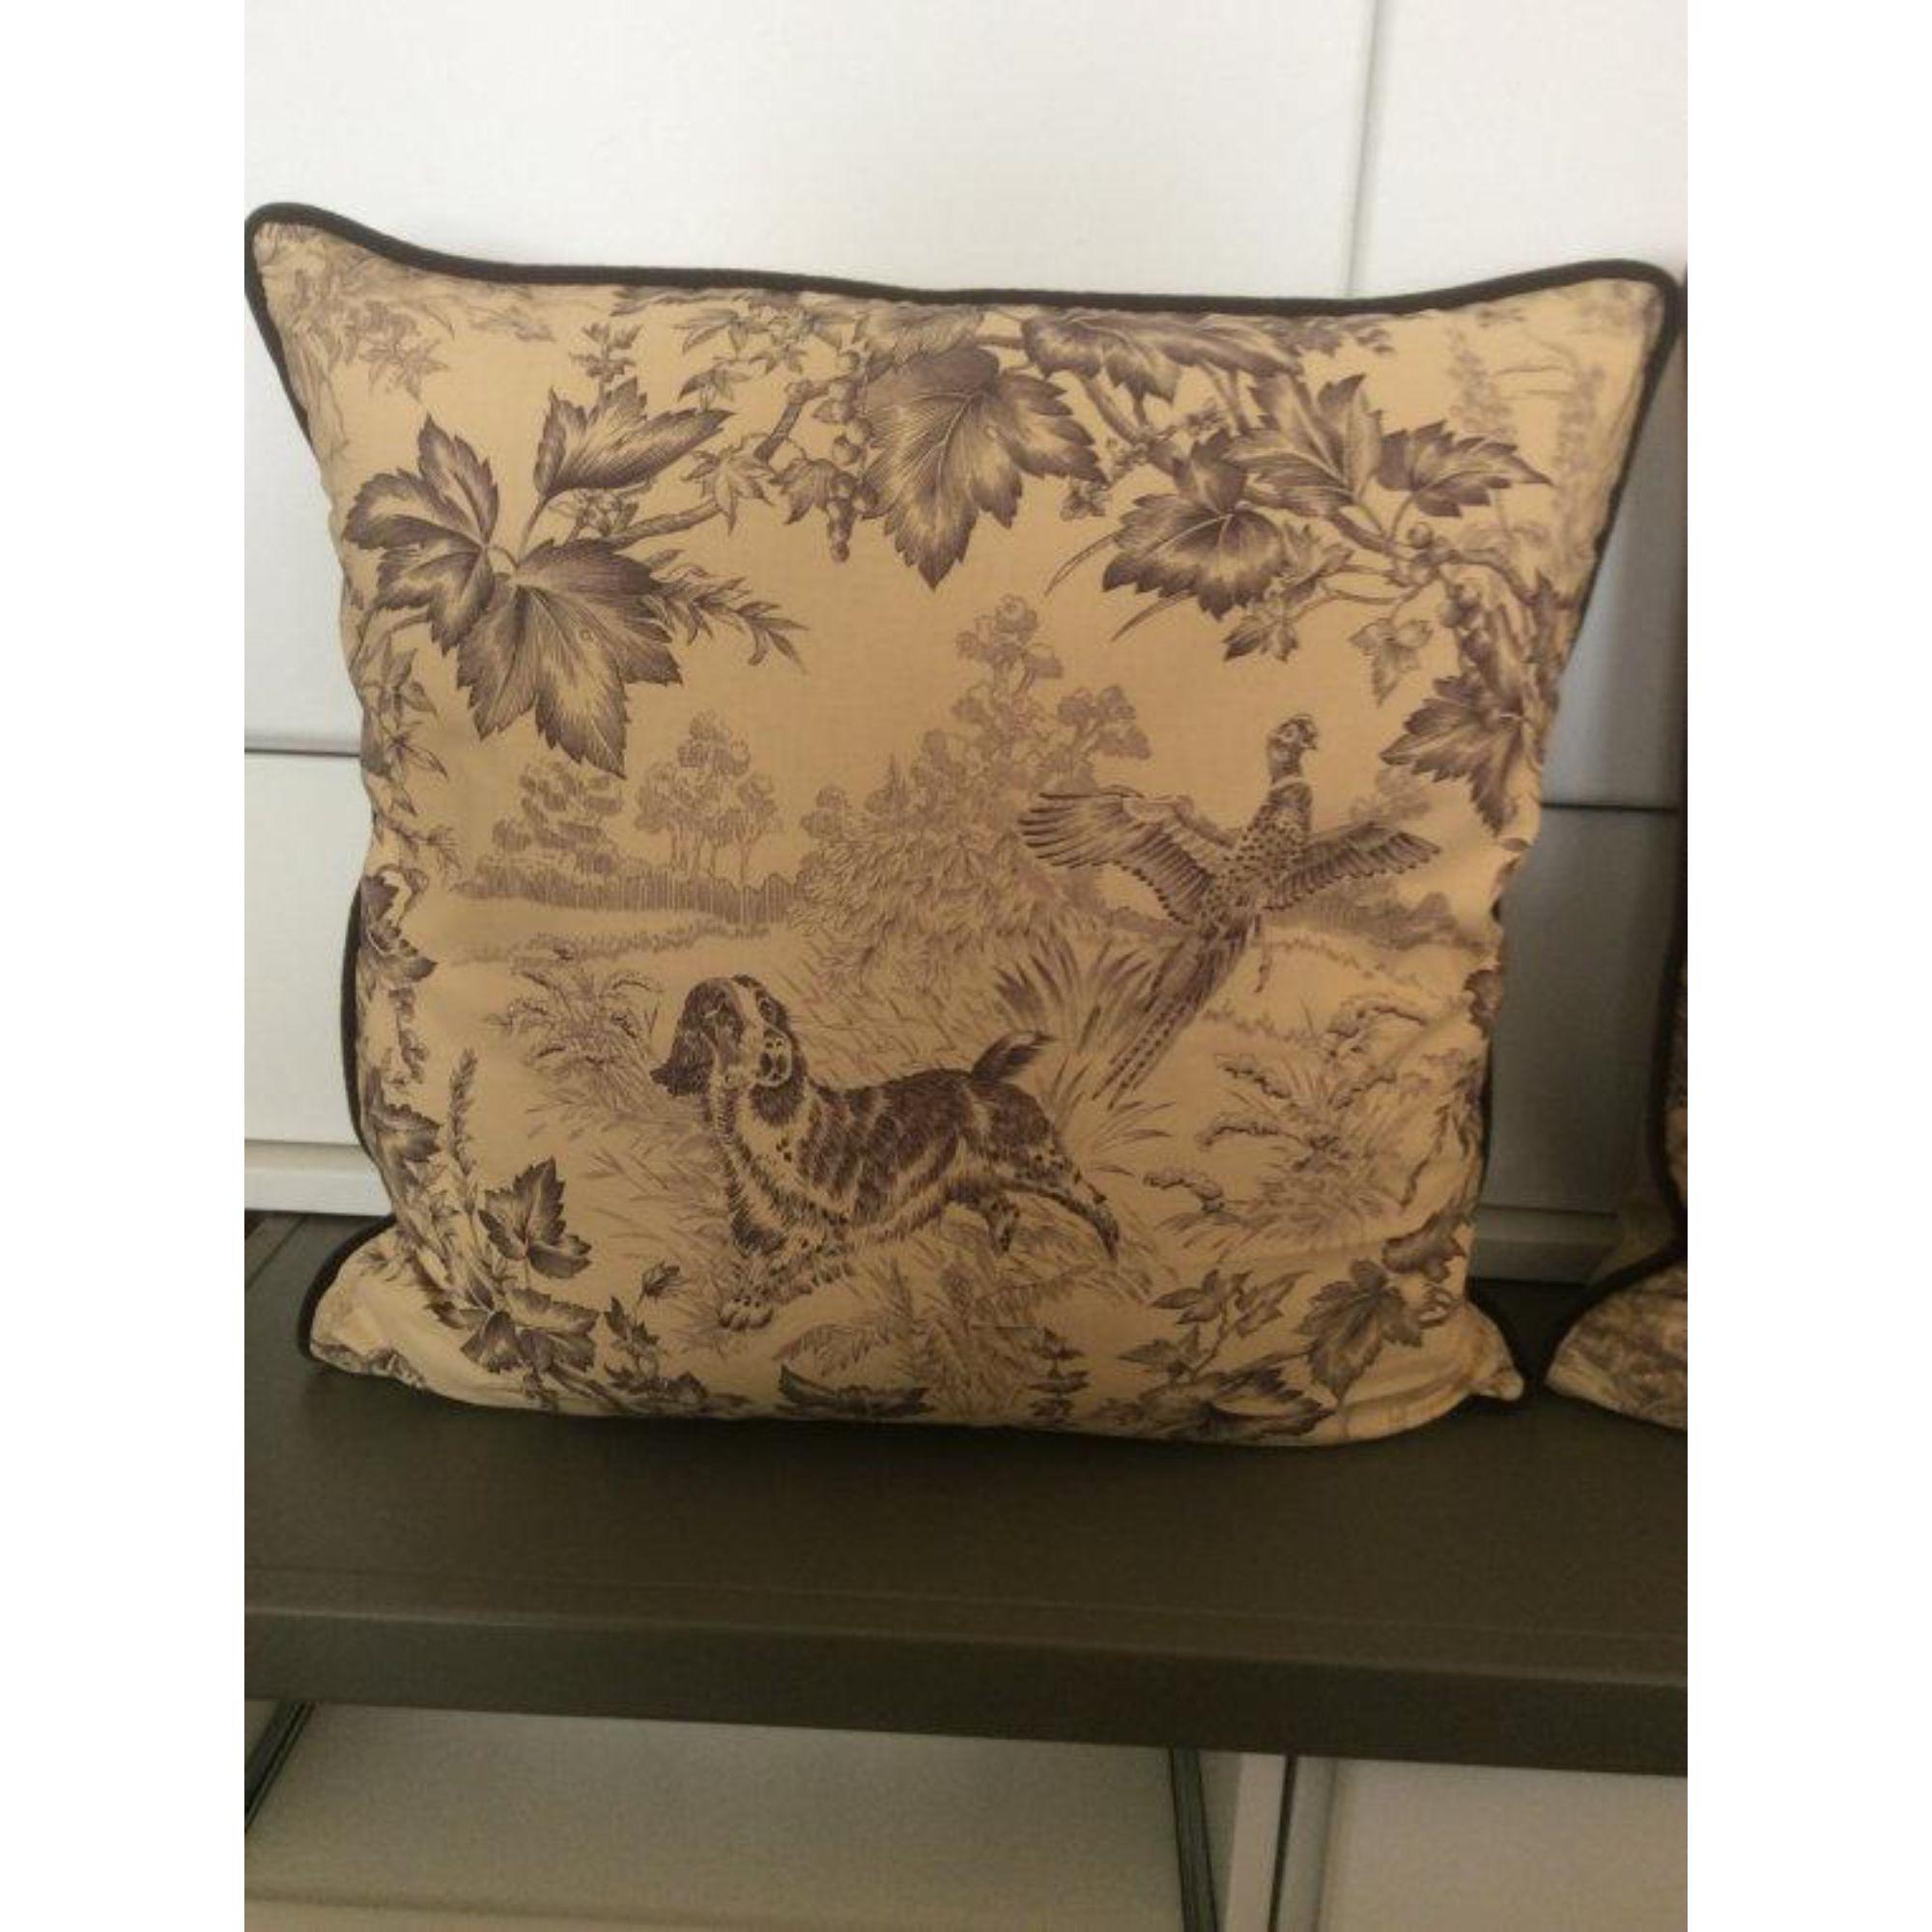 Contemporary Brunschwig & Fils Hunting Toile in Tobacco & Cream Pillows - a Pair For Sale